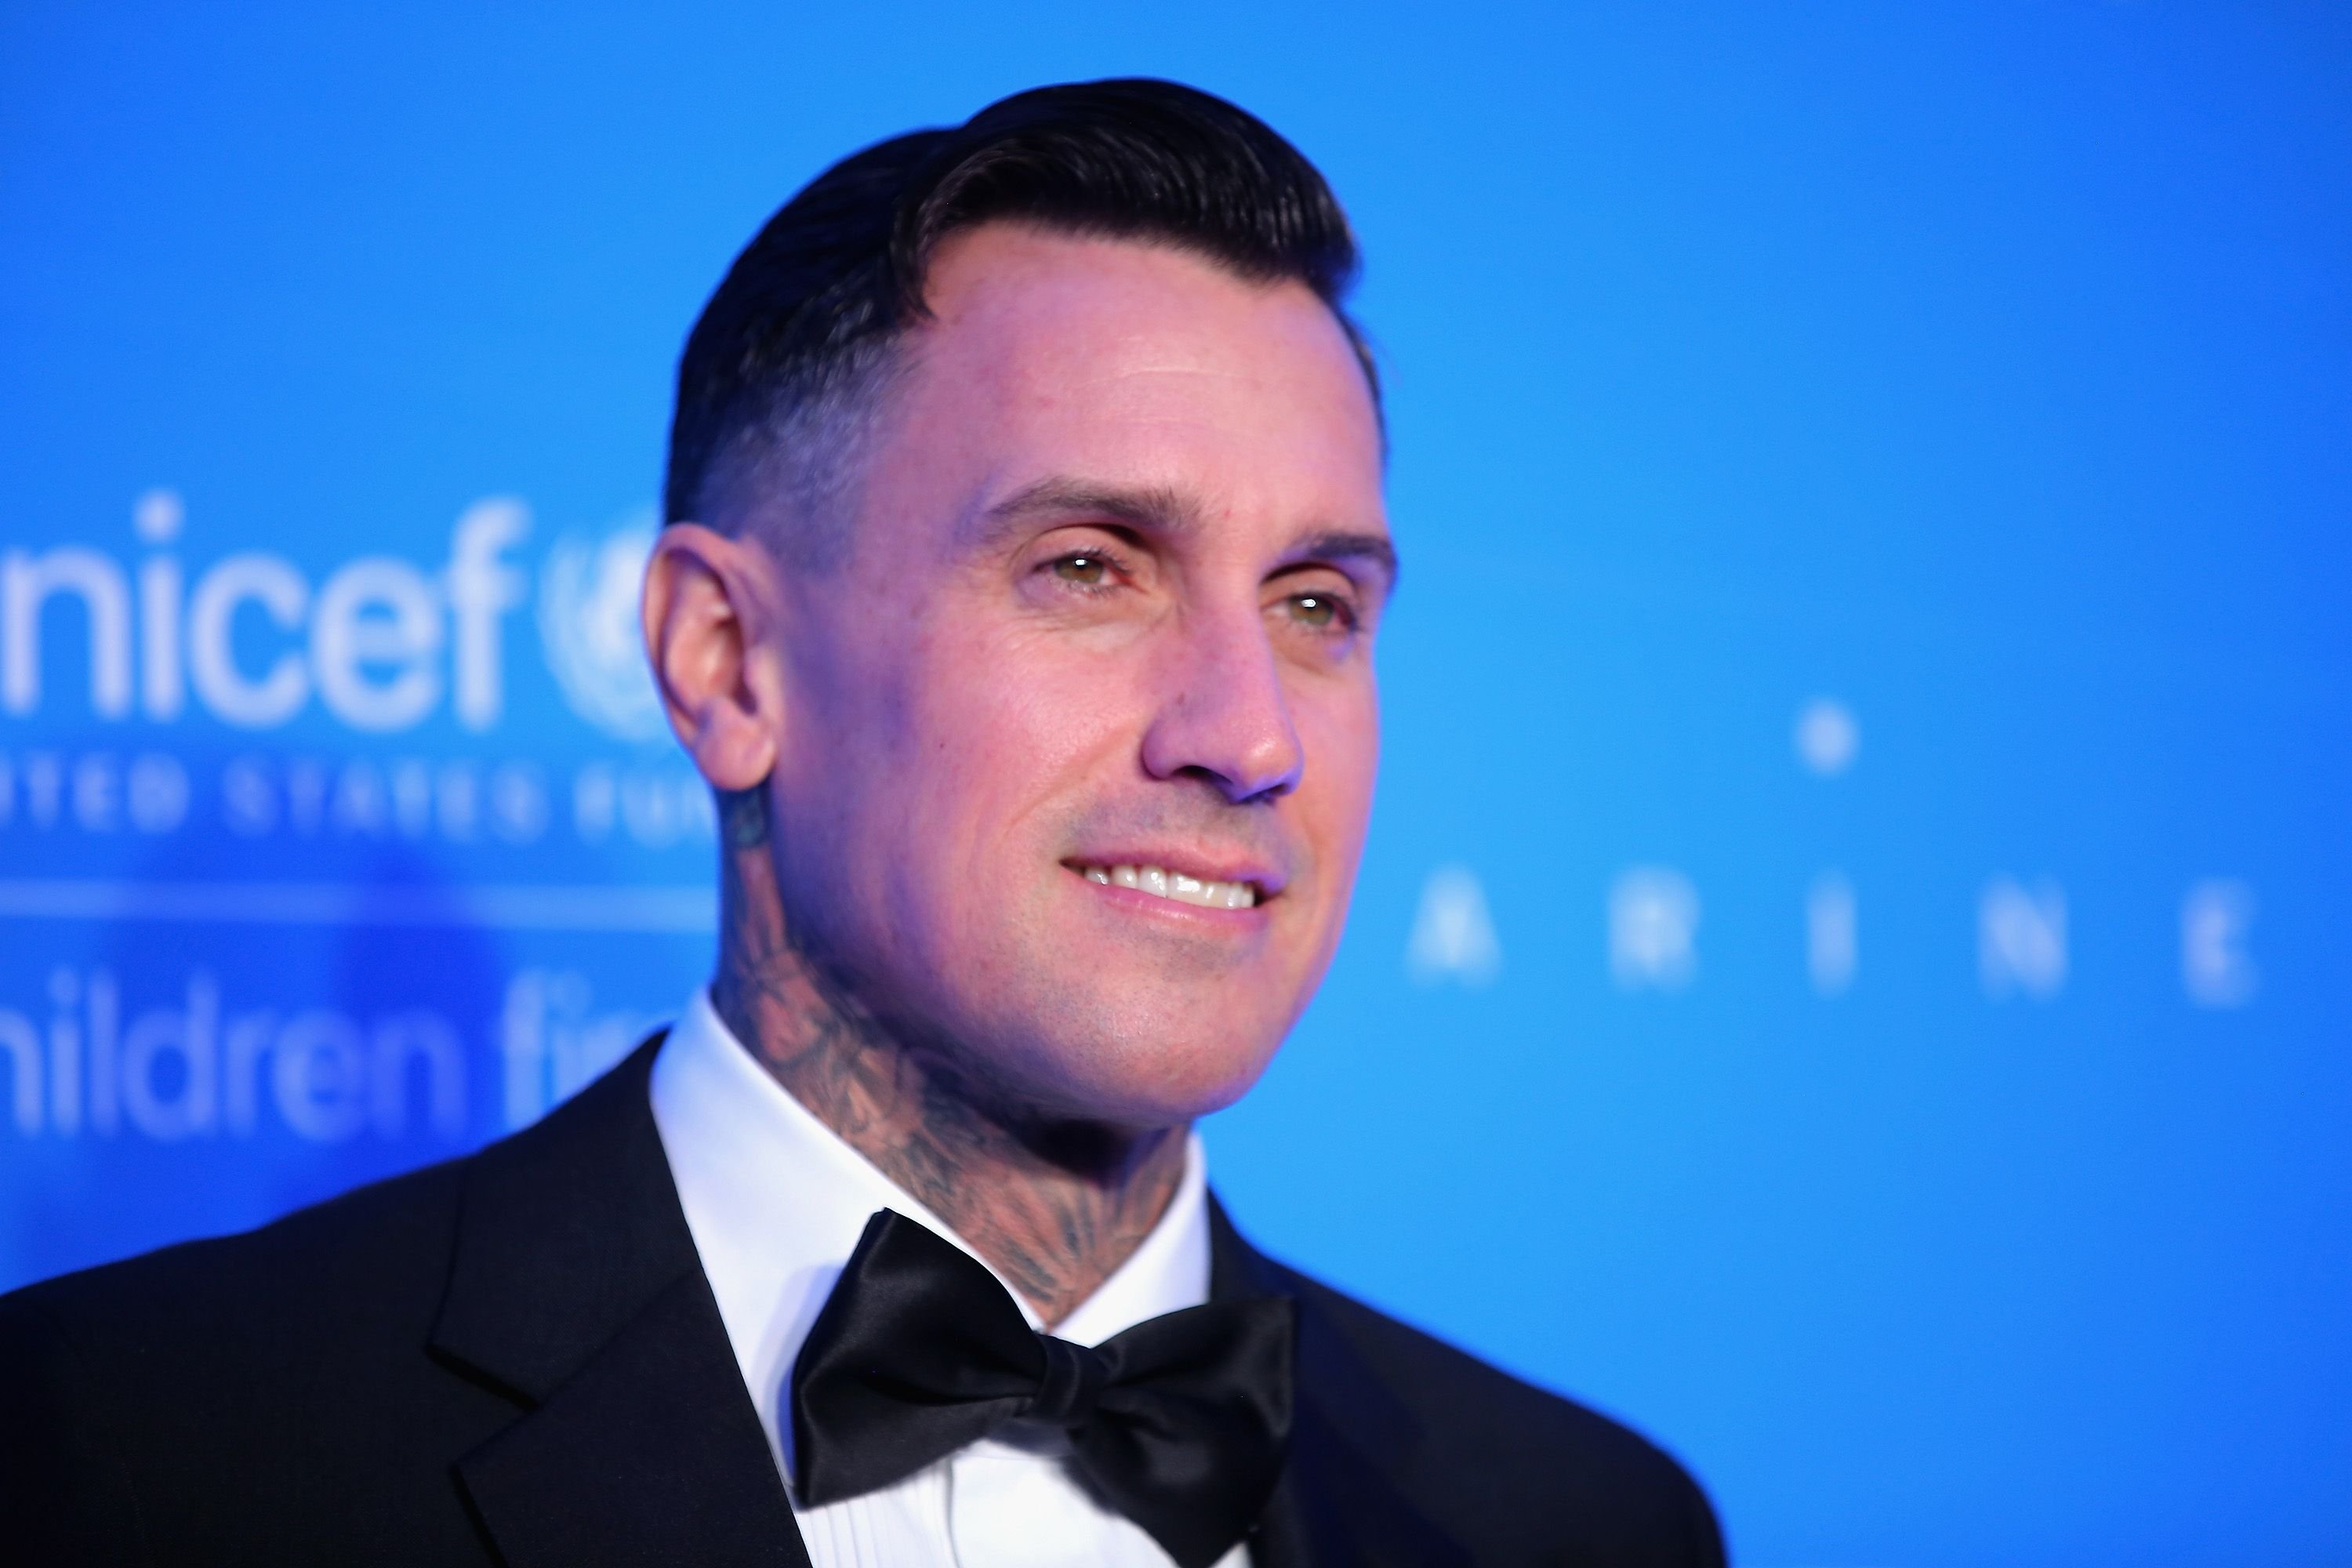 Carey Hart at the 11th Annual UNICEF Snowflake Ball at Cipriani, Wall Street on December 1, 2015, in New York City. | Source: Jemal Countess/Getty Images